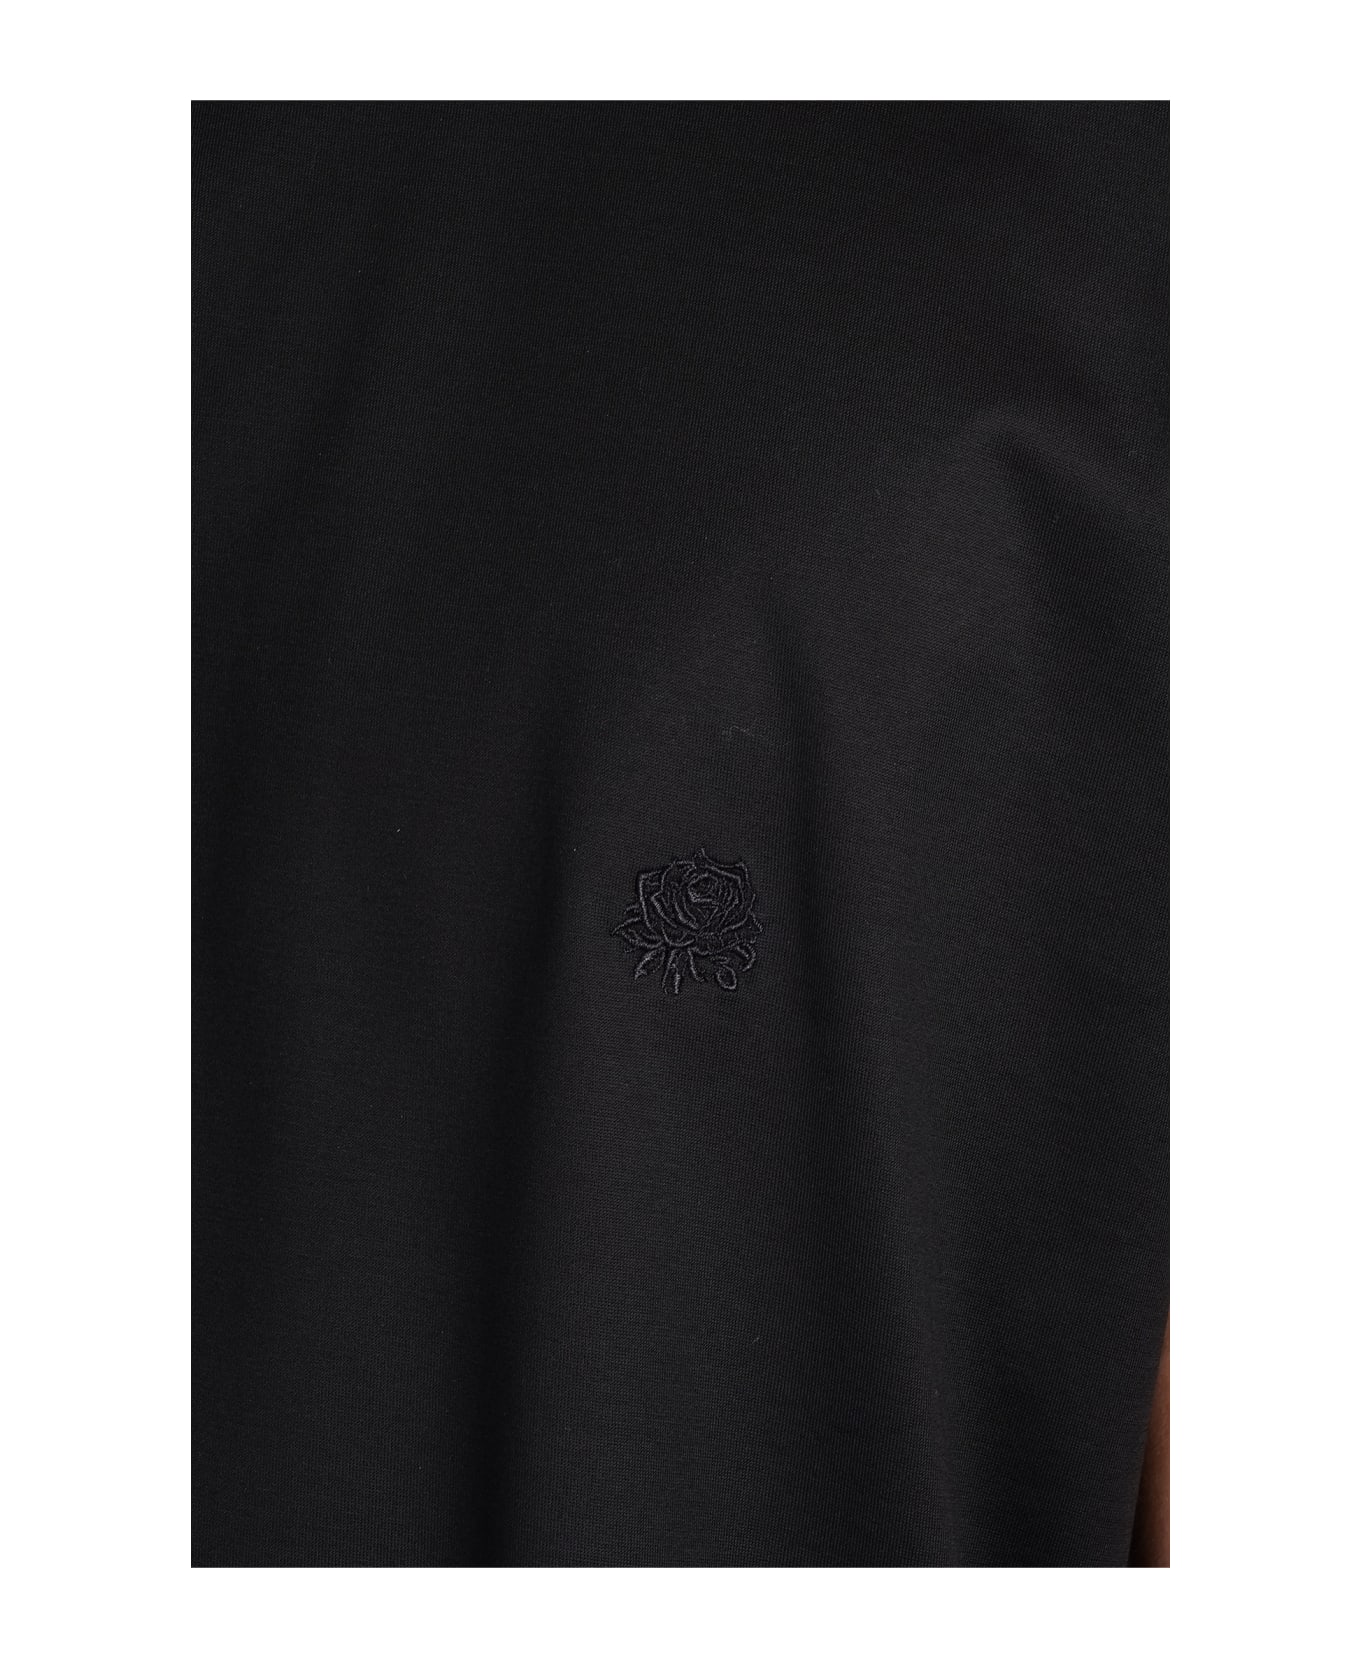 Low Brand B150 Embroidery T-shirt In Black Cotton - black シャツ